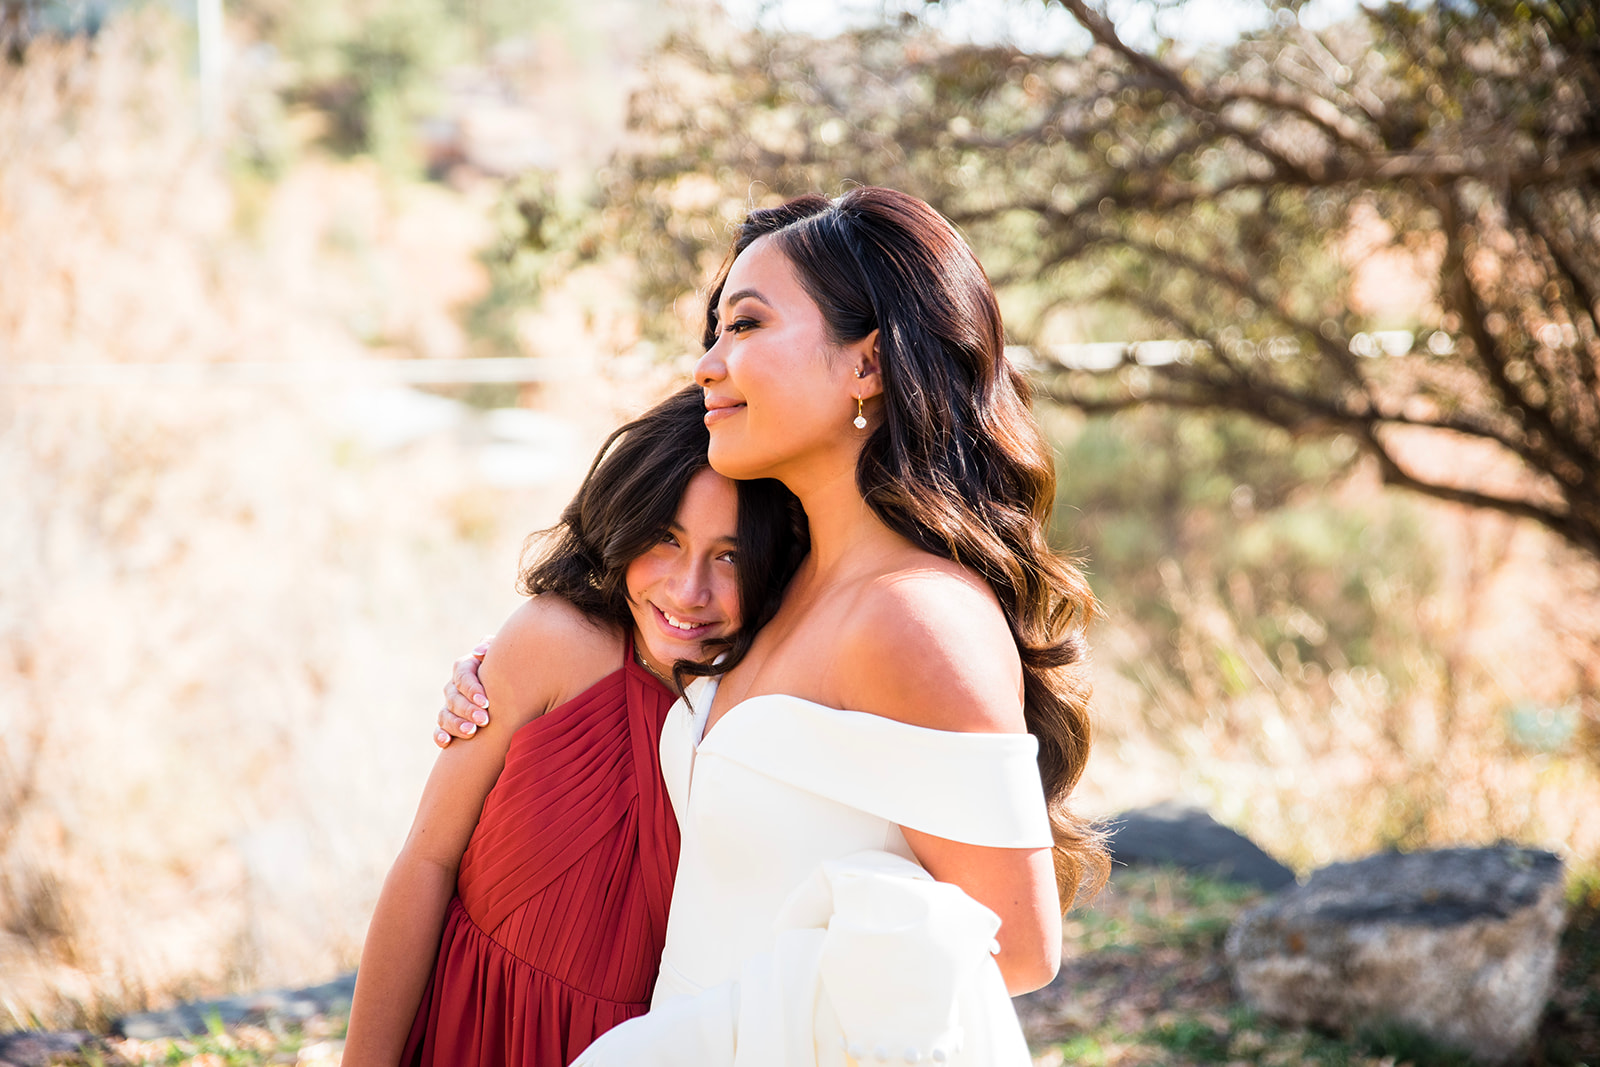 The bride hugs her preteen daughter after an emotional first look on her wedding day.